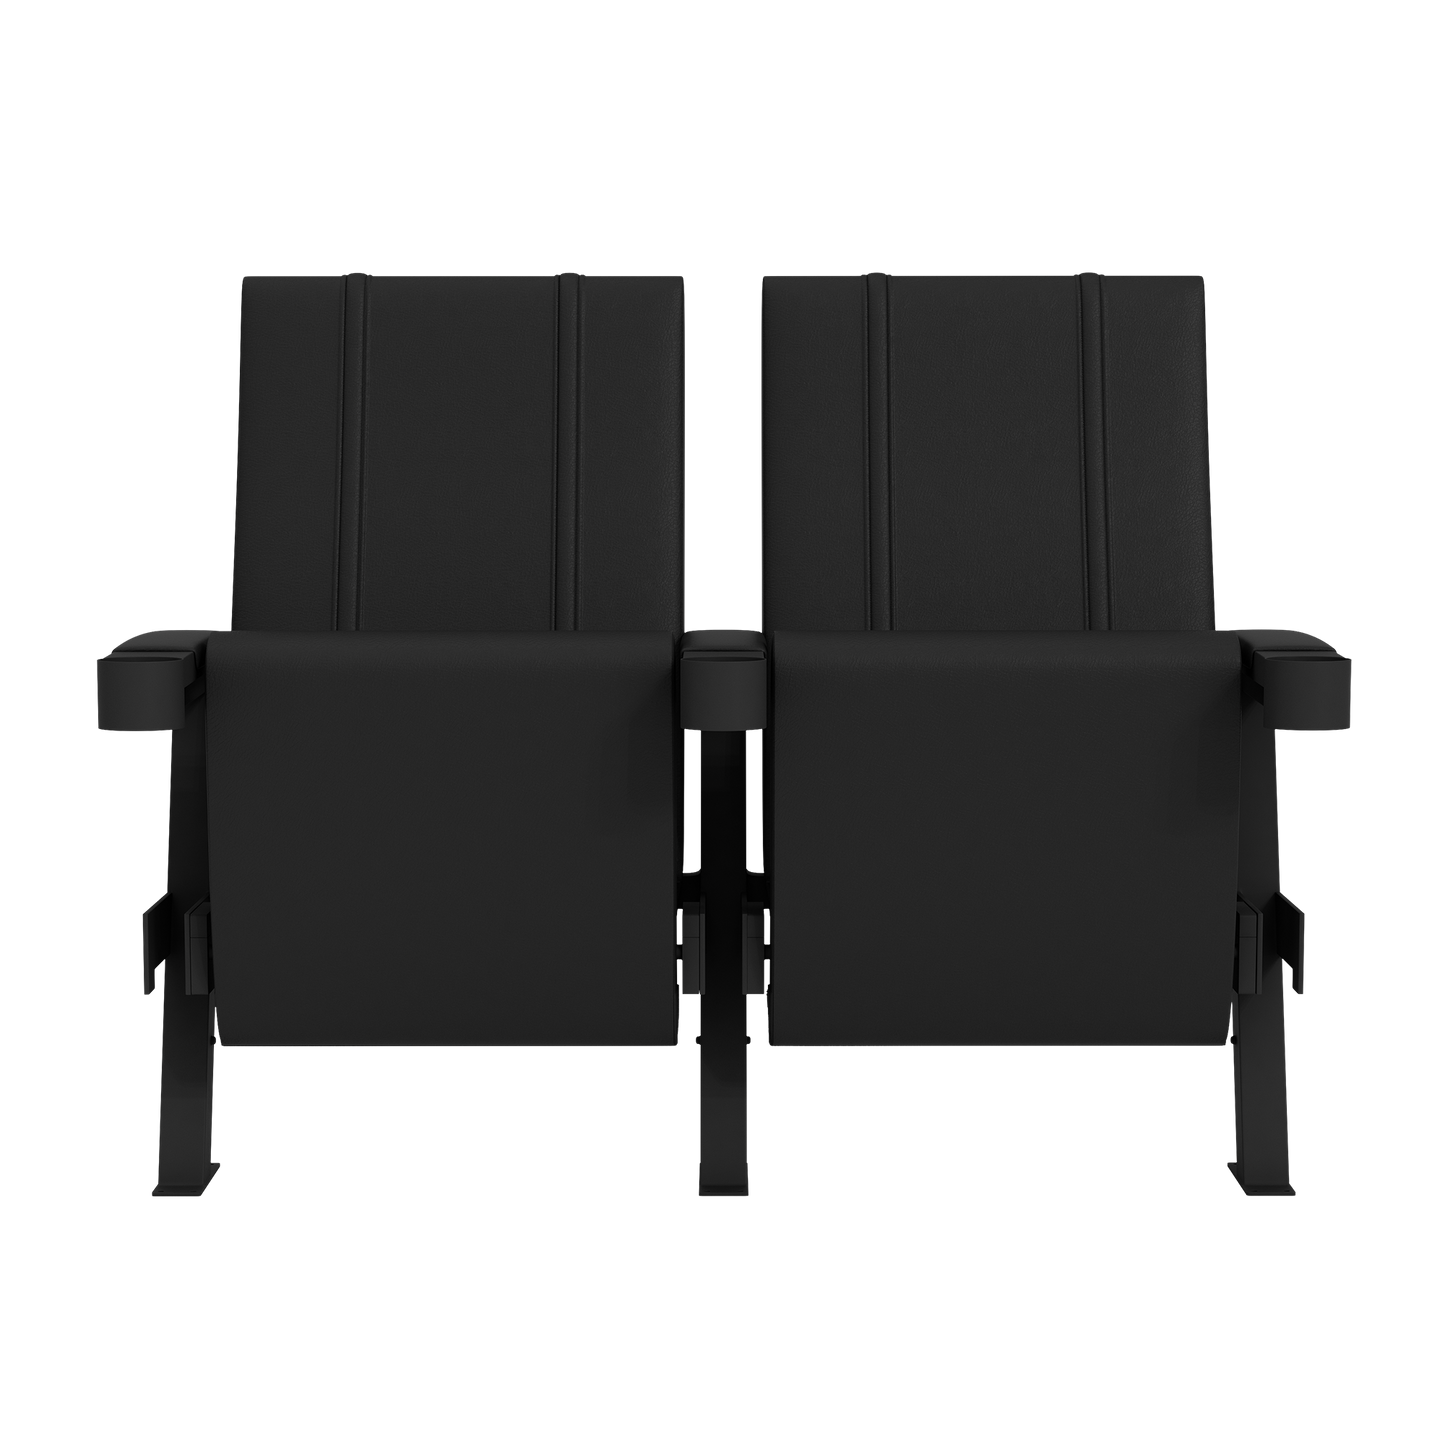 SuiteMax 3.5 VIP Seats with New York Jets Classic Logo